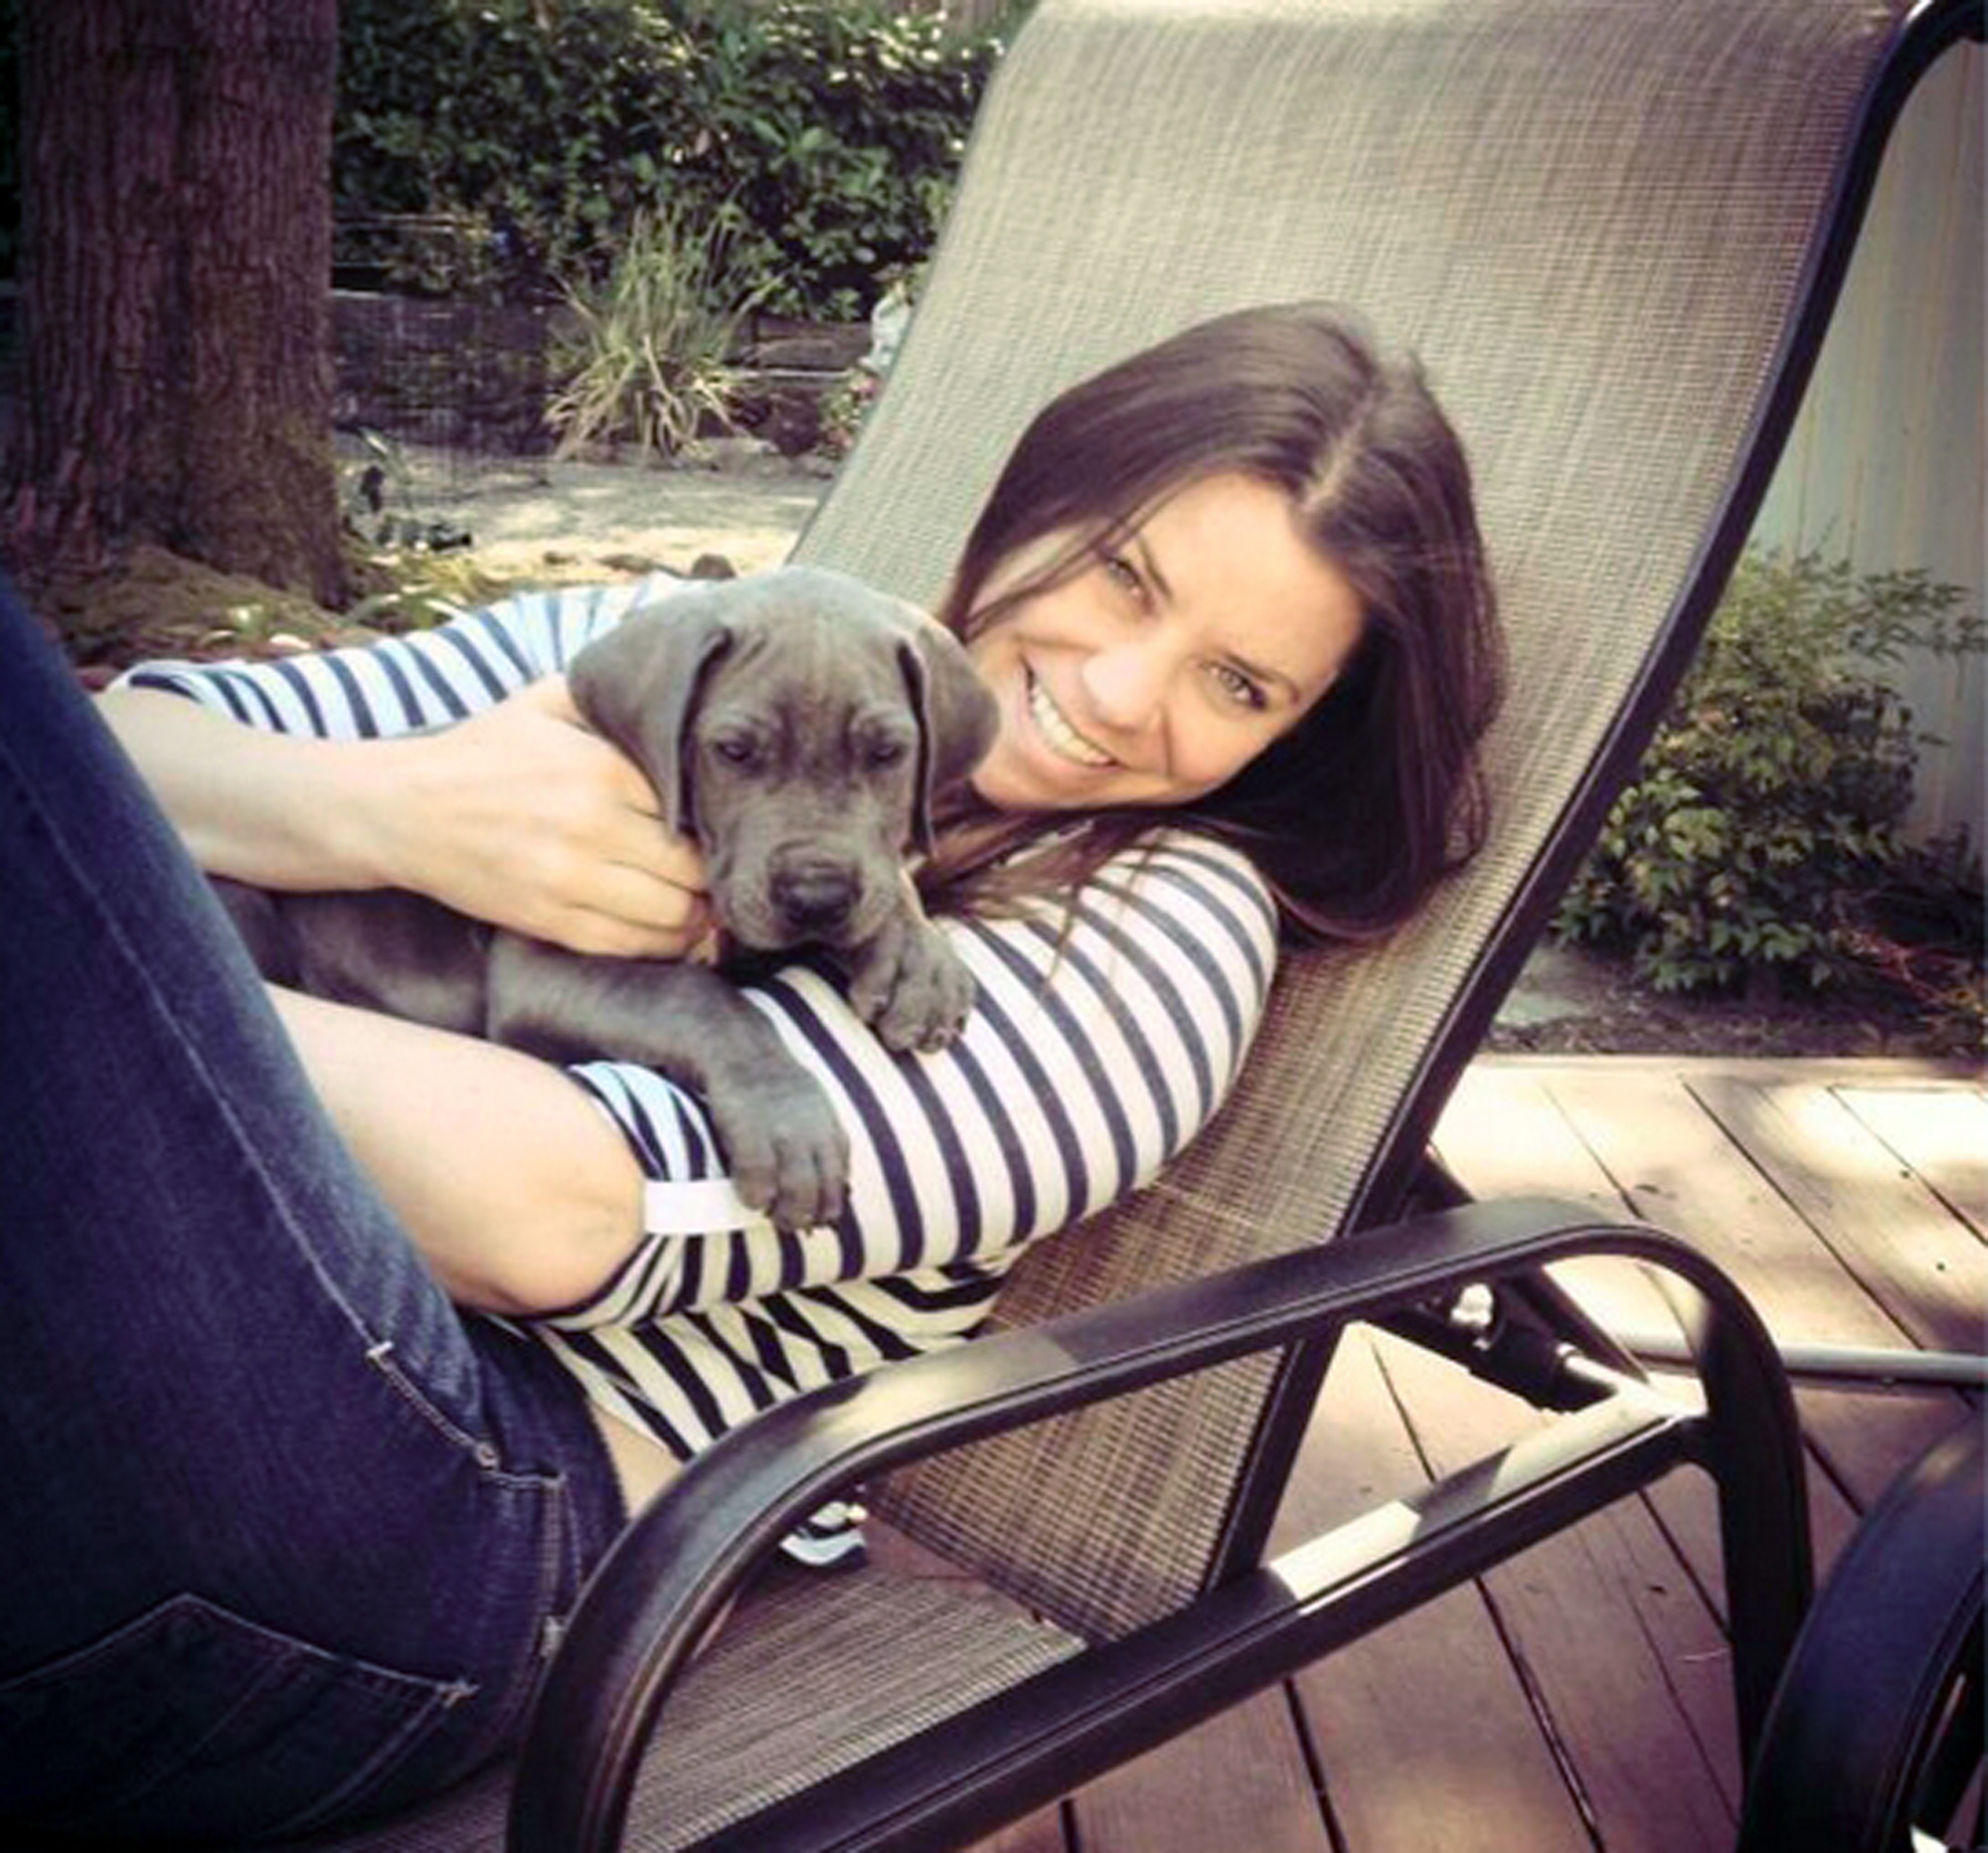 This undated file photo provided by the Maynard family shows Brittany Maynard, a 29-year-old terminally ill woman who plans to take her own life under Oregons death with dignity law. (AP)